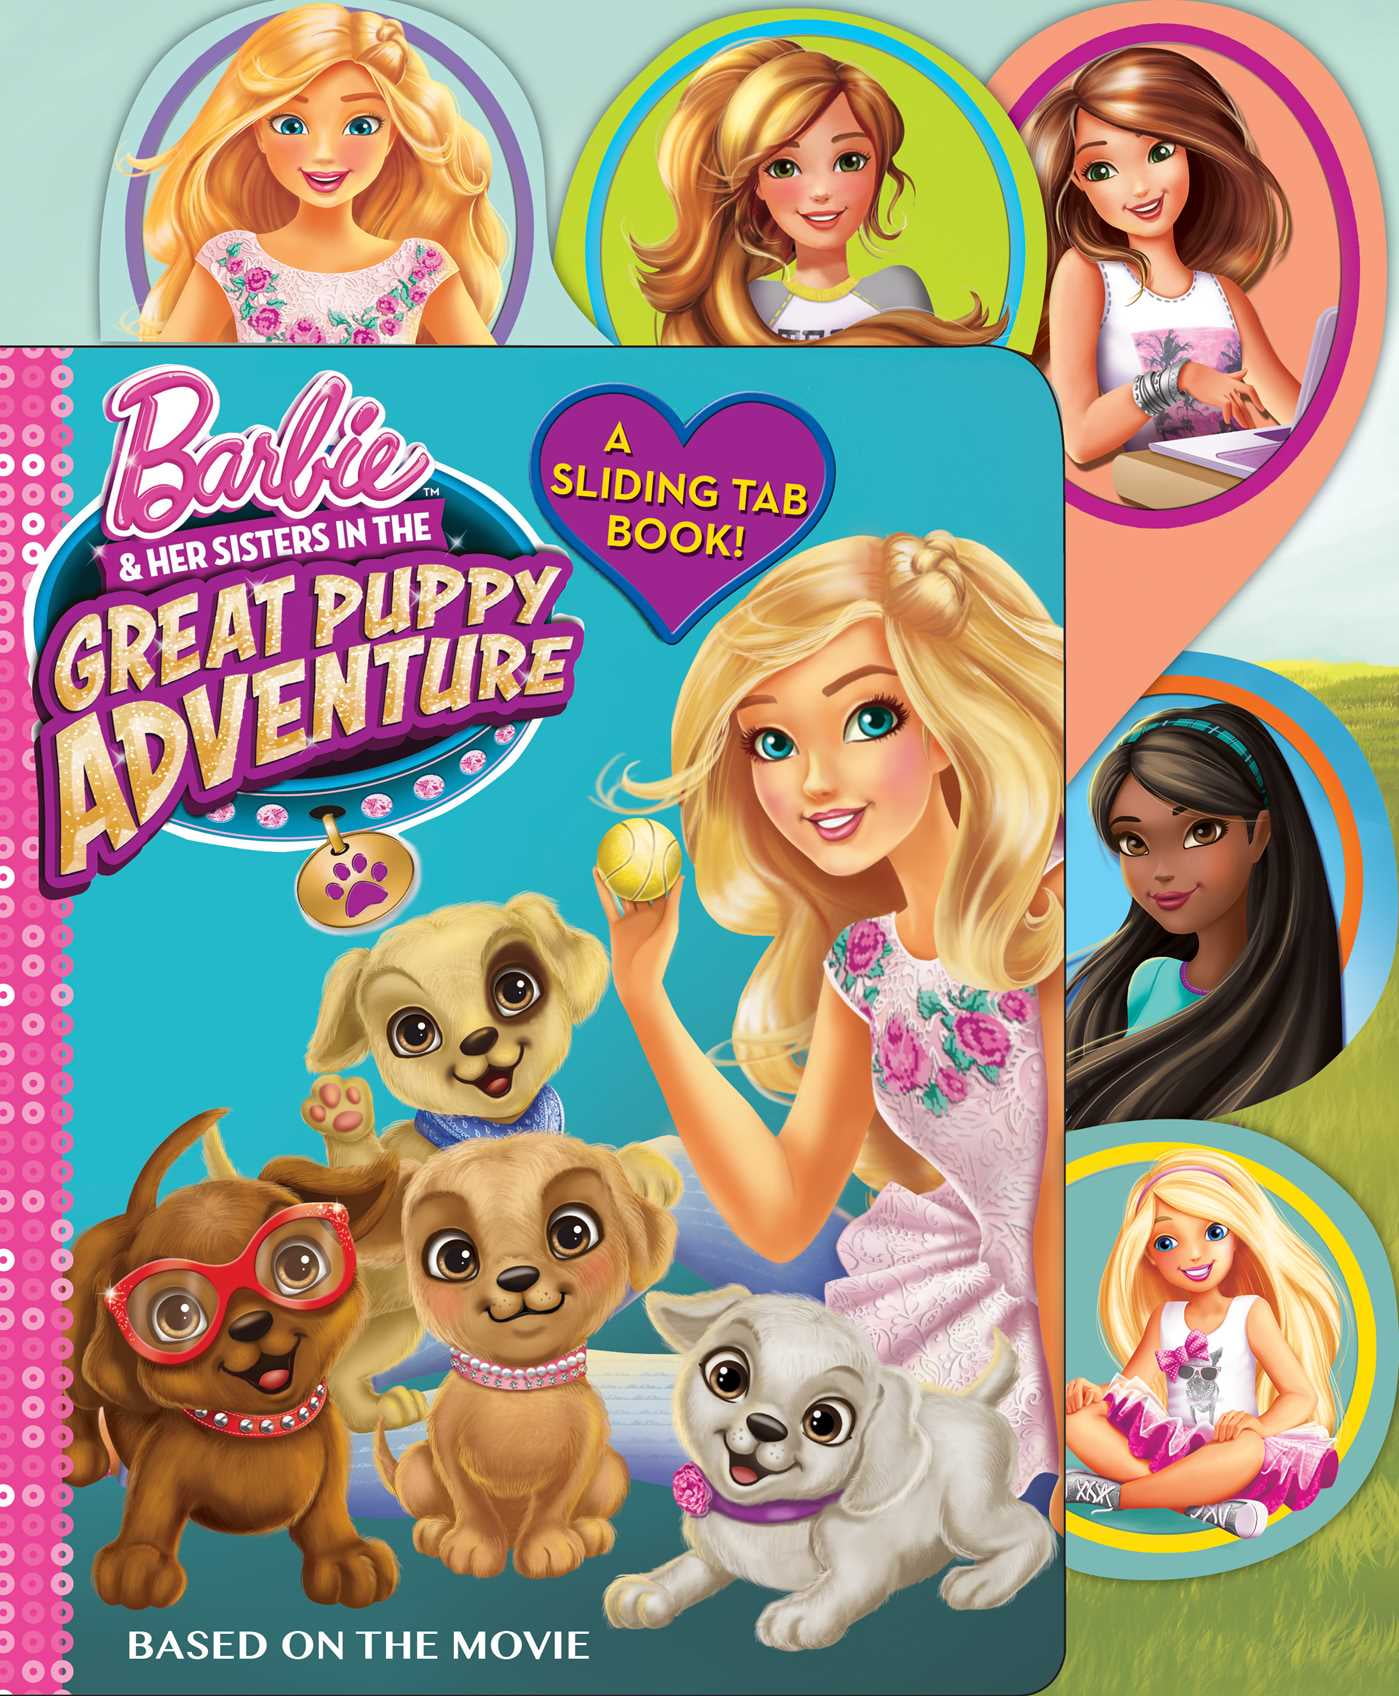 barbie & her sisters in the great puppy adventure